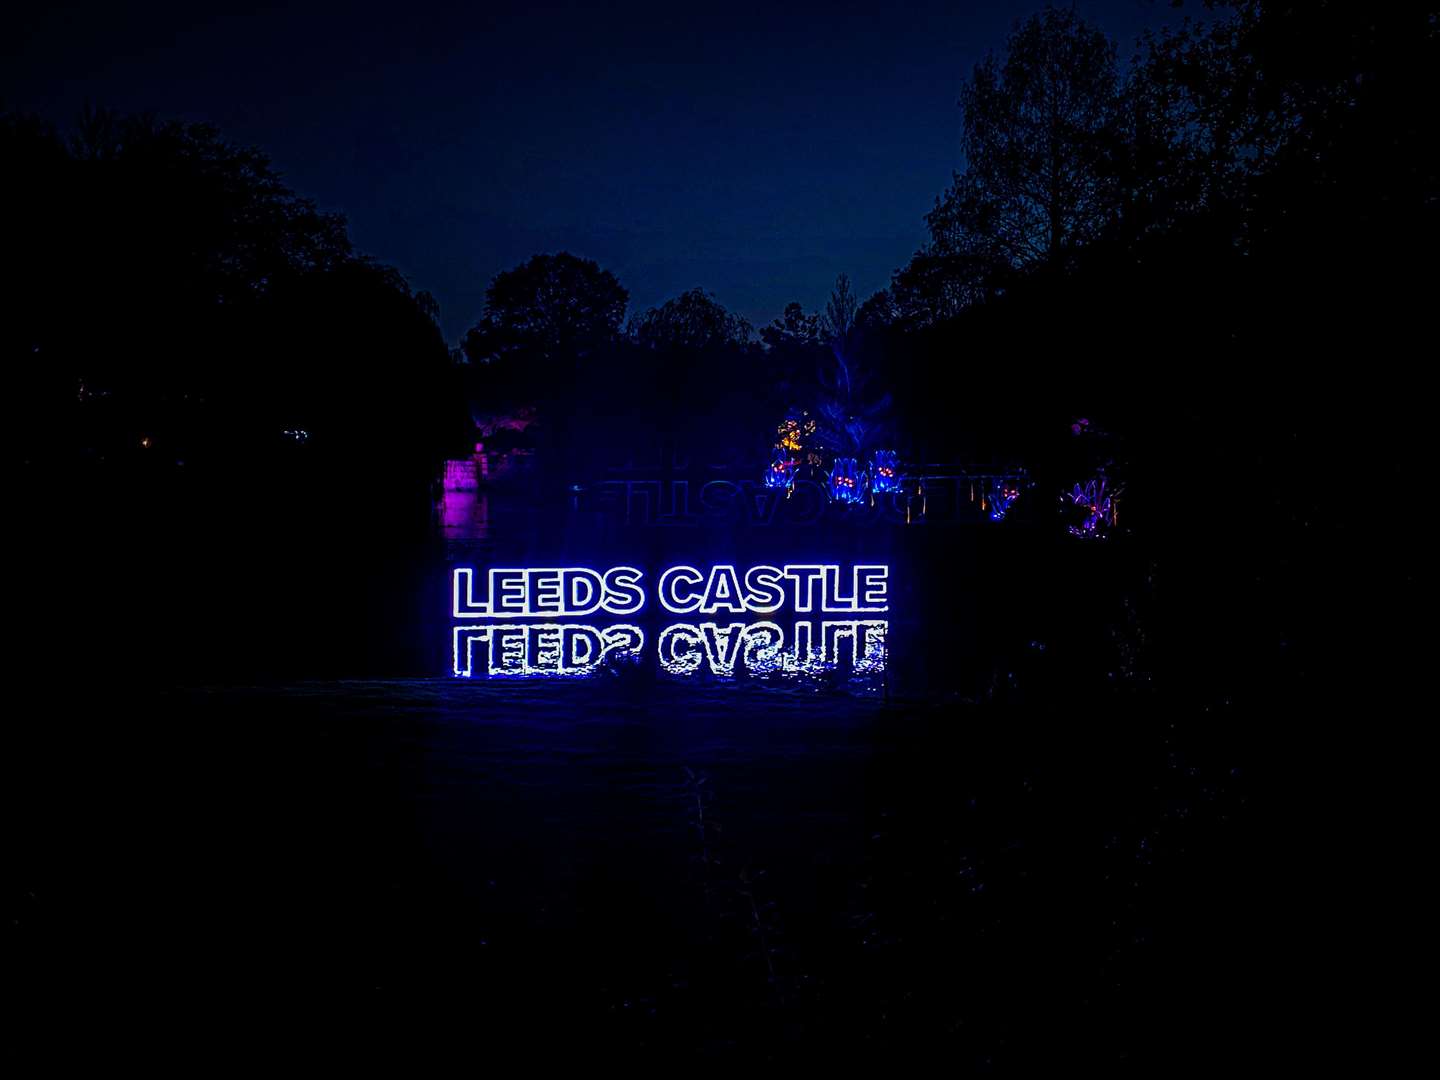 The trail began with a large Leeds Castle sign lighting up the lake